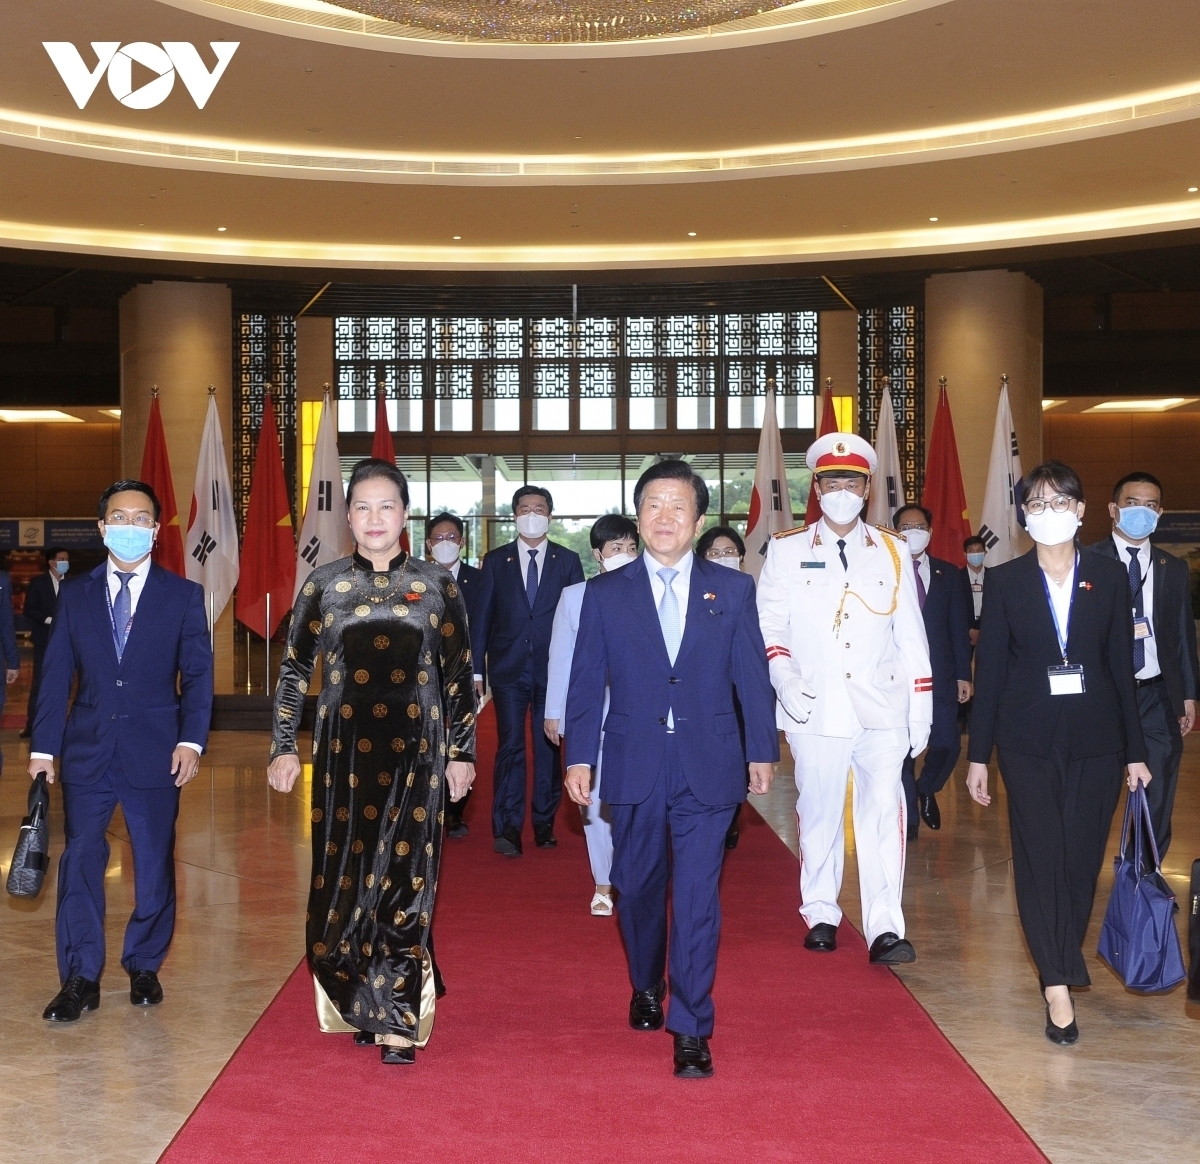 Speaker of the National Assembly of the Republic of Korea Park Byeong-Seug, alongside his wife and senior delegation pay a visit to Vietnam from October 31 to November 4 at the invitation of National Assembly Chairwoman Nguyen Thi Kim Ngan.